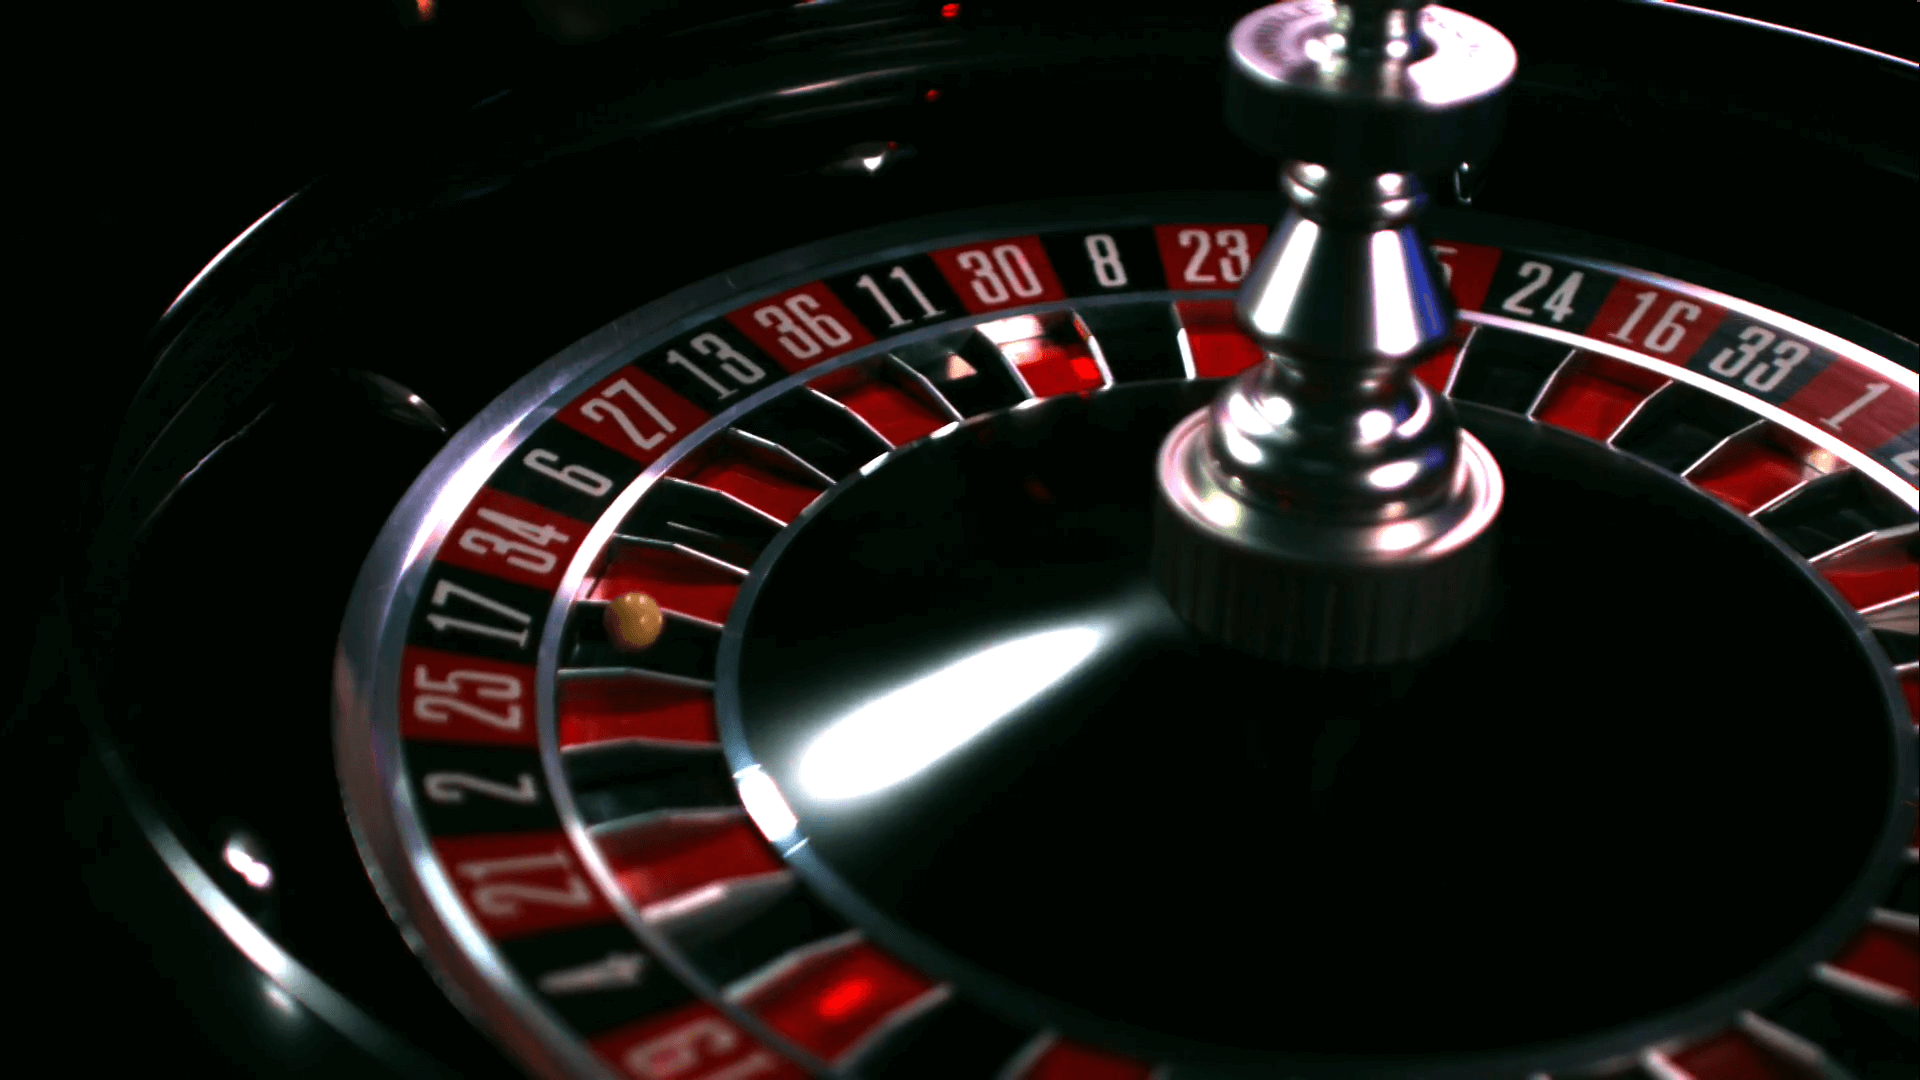 Immersive Roulette review